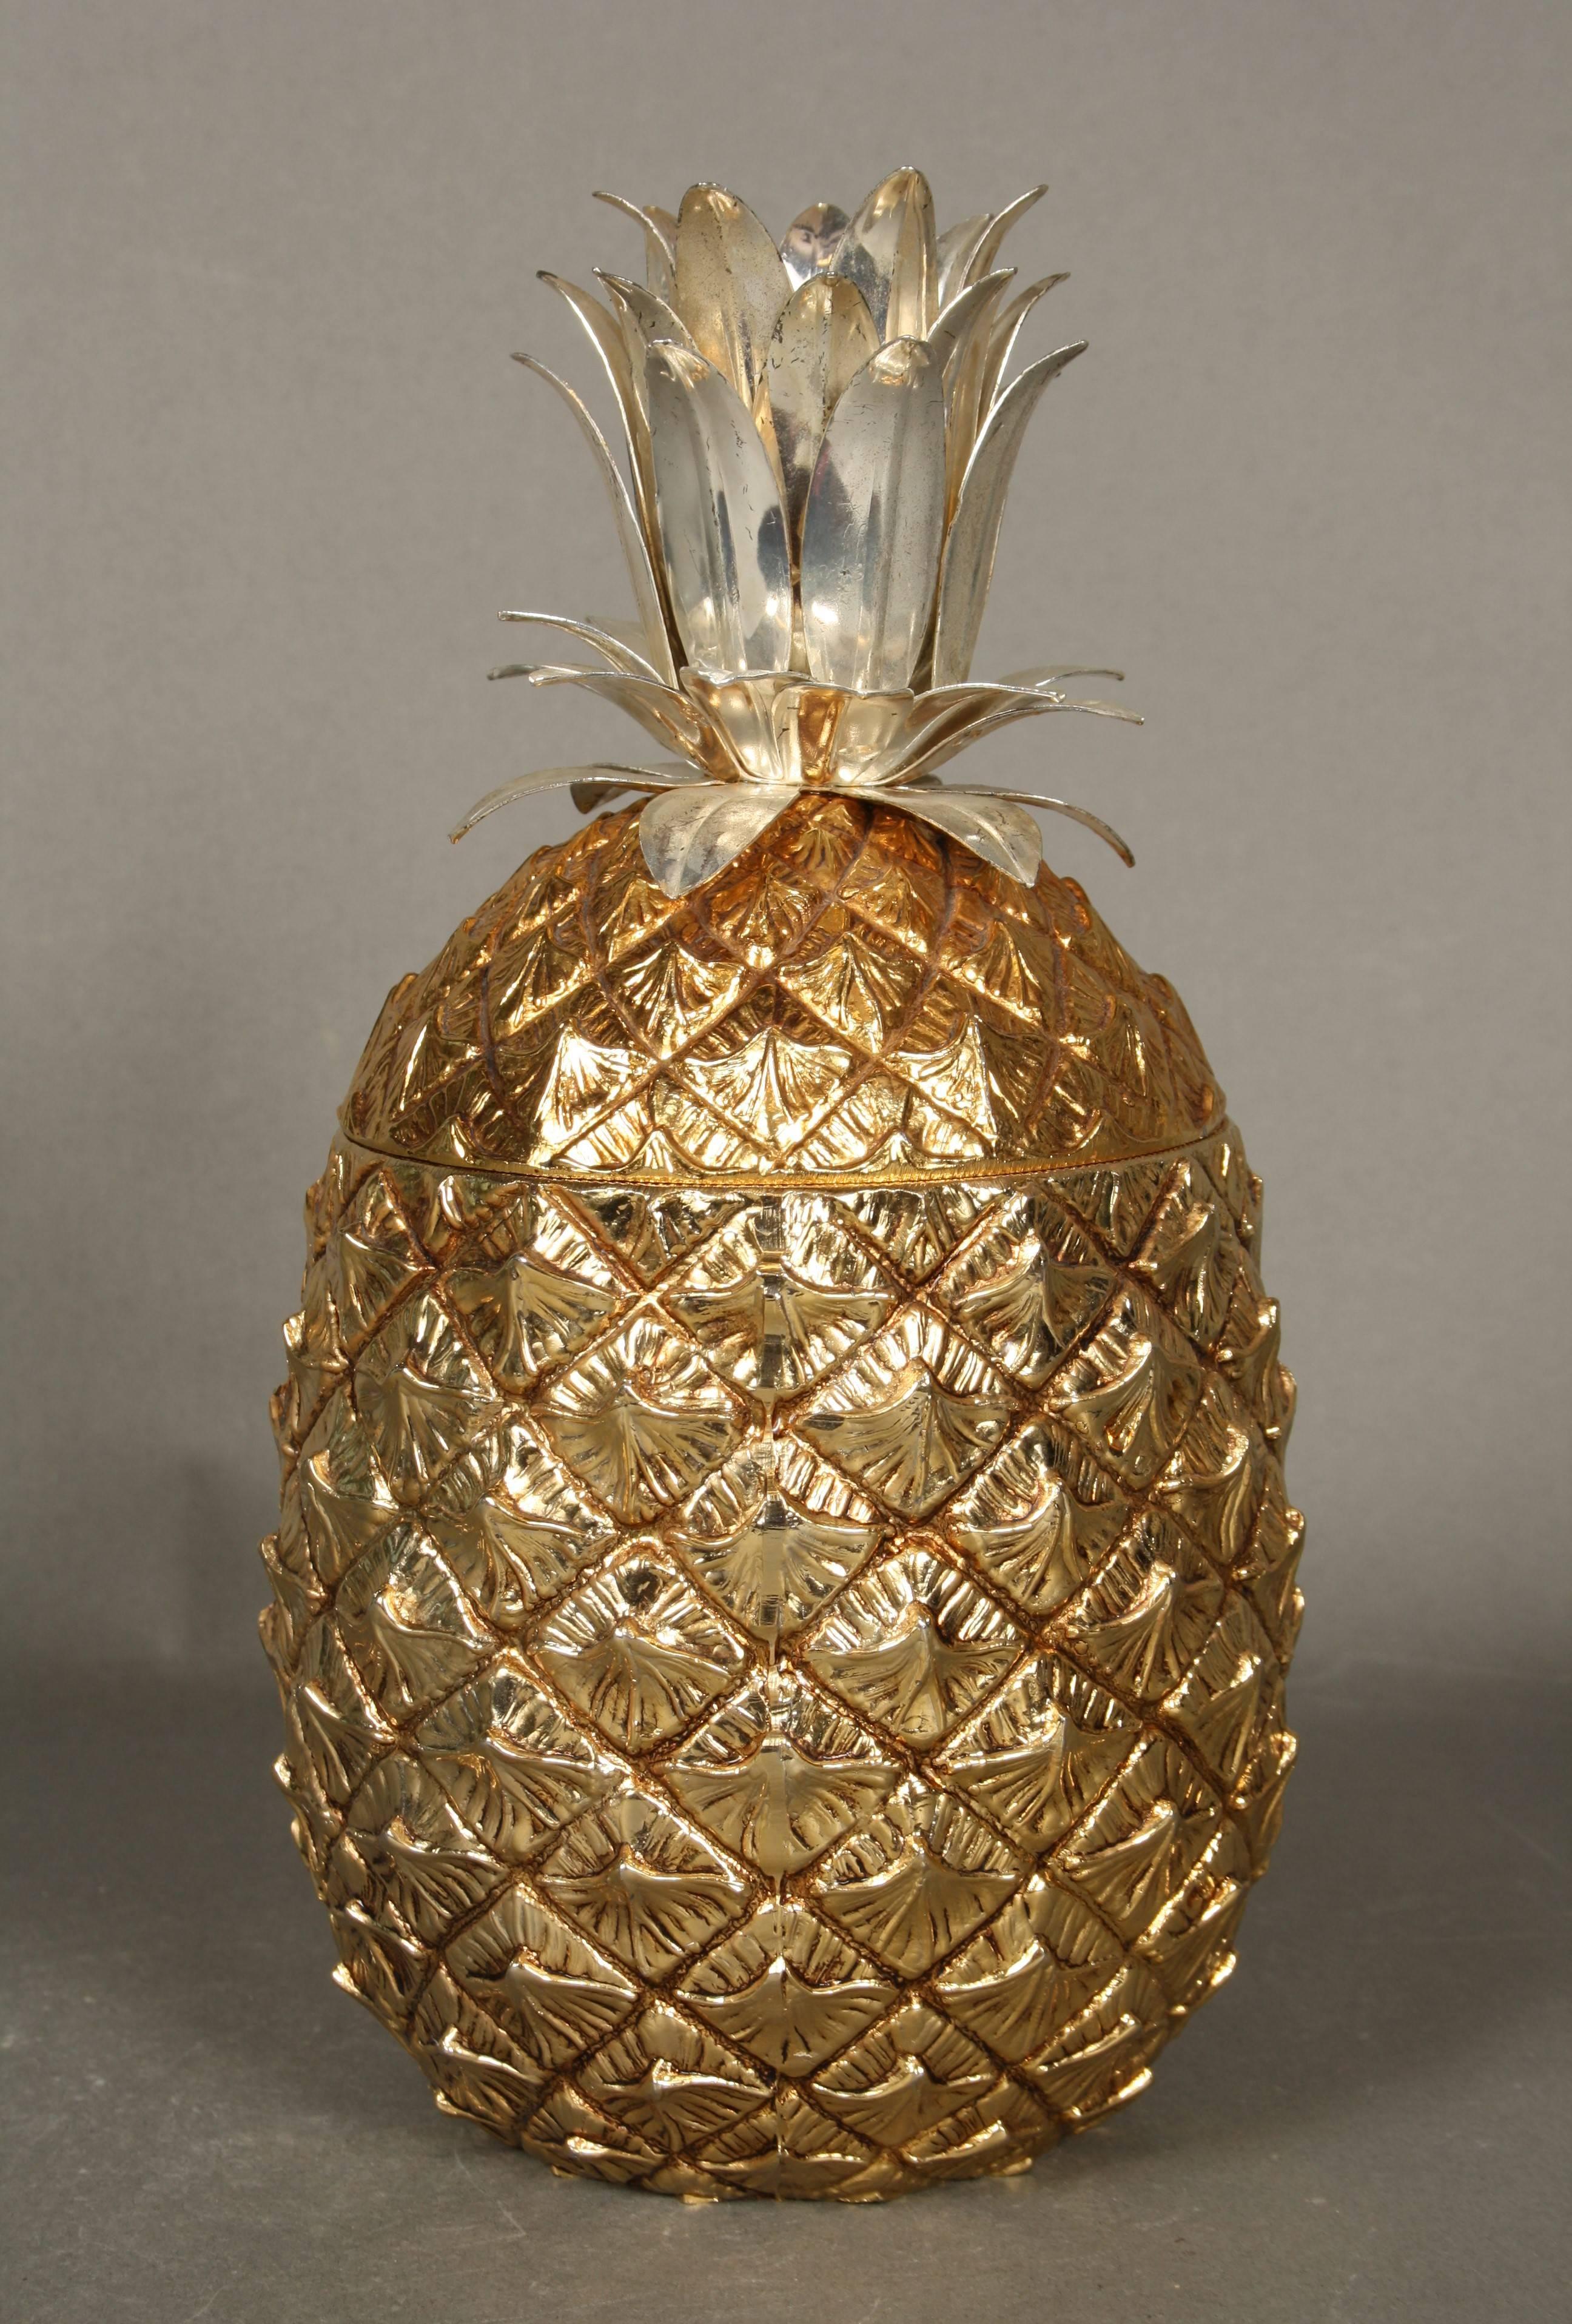 Awesome gilt colored with top silver colored, 1960s, Mauro Manetti pineapple shaped ice bucket.
Signed on base MM, Firenze, made in Italy.